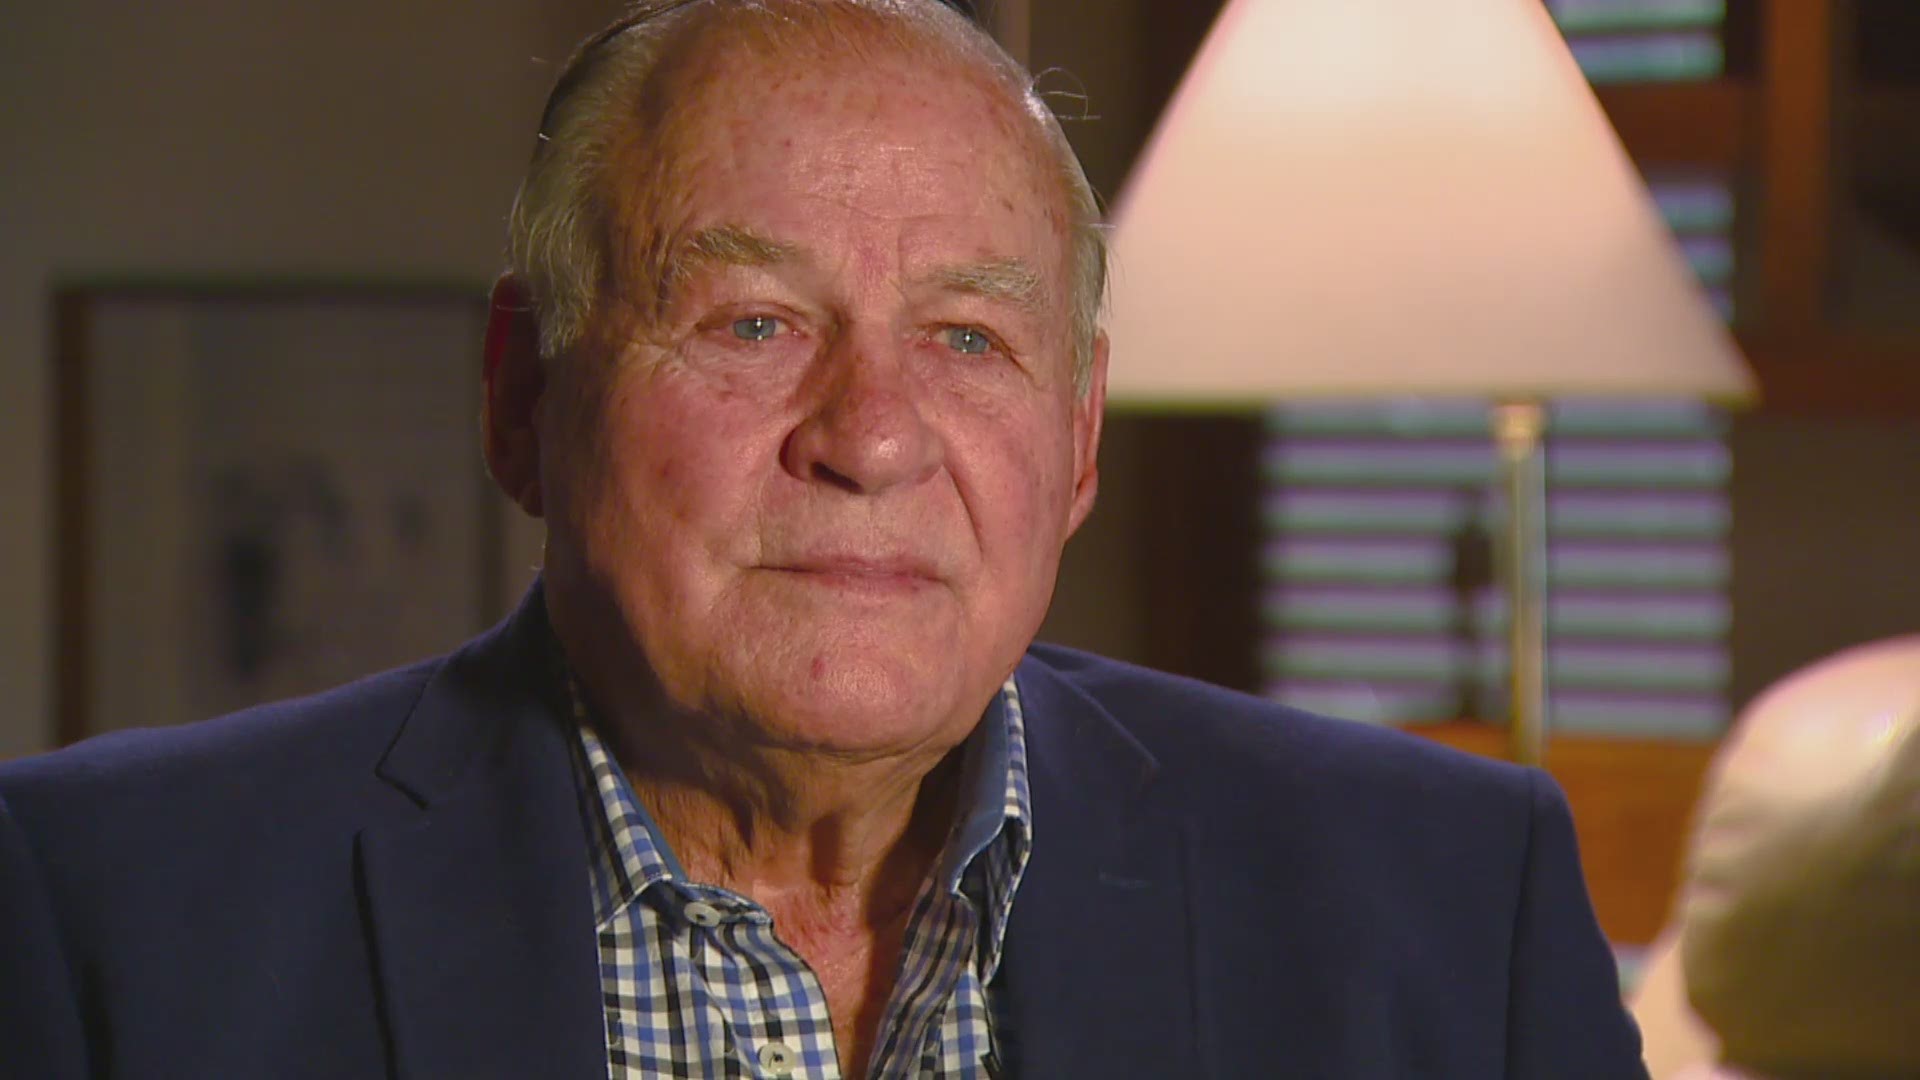 For over half of Jerry Kramer's 82 years on Earth he has ridden a "Will-he-or-won't-he get into the Pro Football Hall of Fame "roller coaster." And for 45 years the NFL's answer has been "no." Saturday night, he will be alongside a handful of family members in th